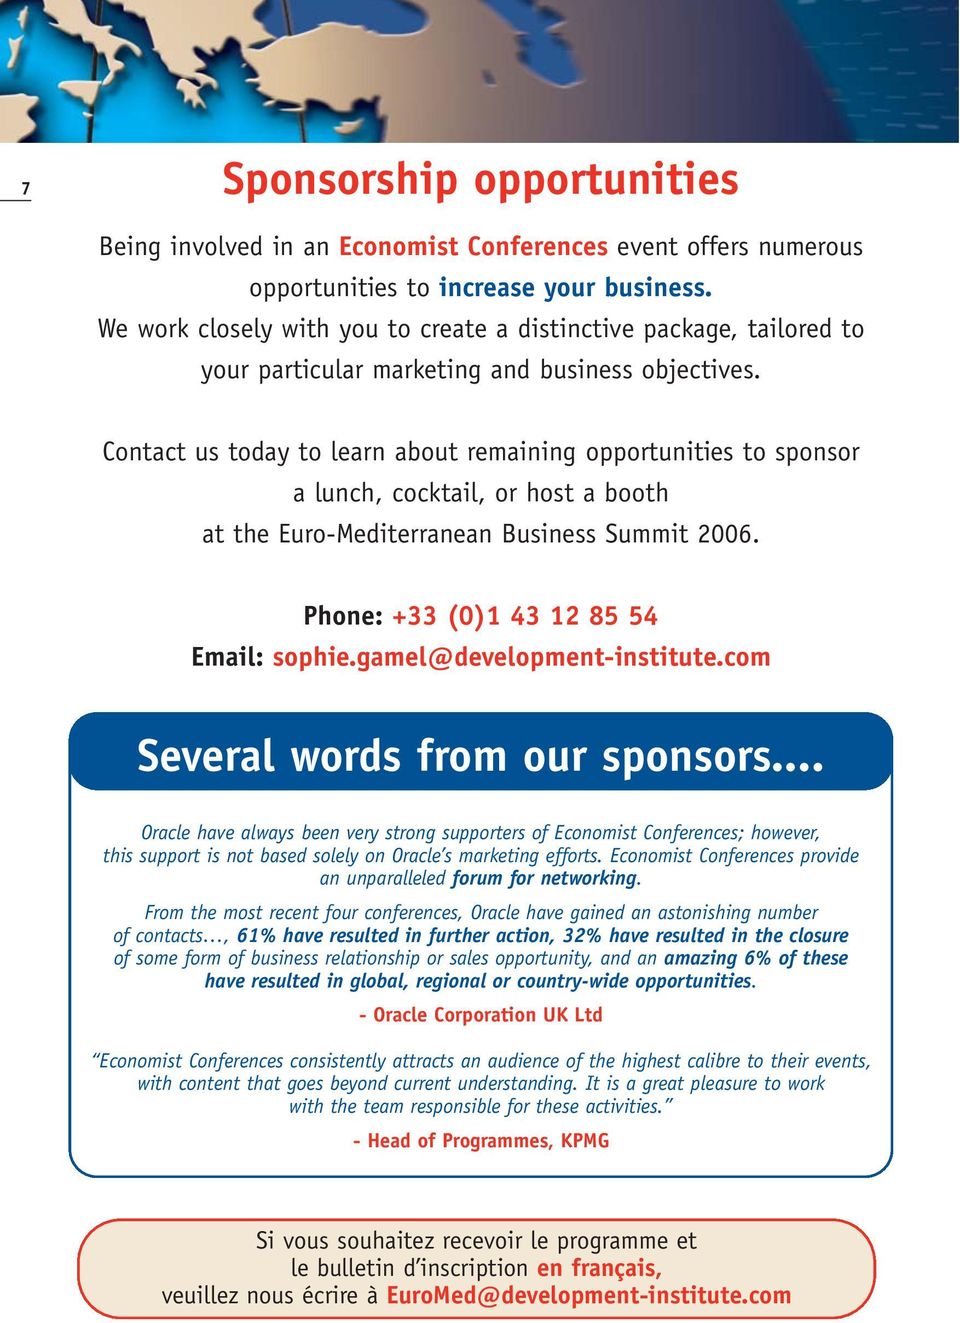 Contact us today to learn about remaining opportunities to sponsor a lunch, cocktail, or host a booth at the Euro-Mediterranean Business Summit 2006. Phone: +33 (0)1 43 12 85 54 Email: sophie.